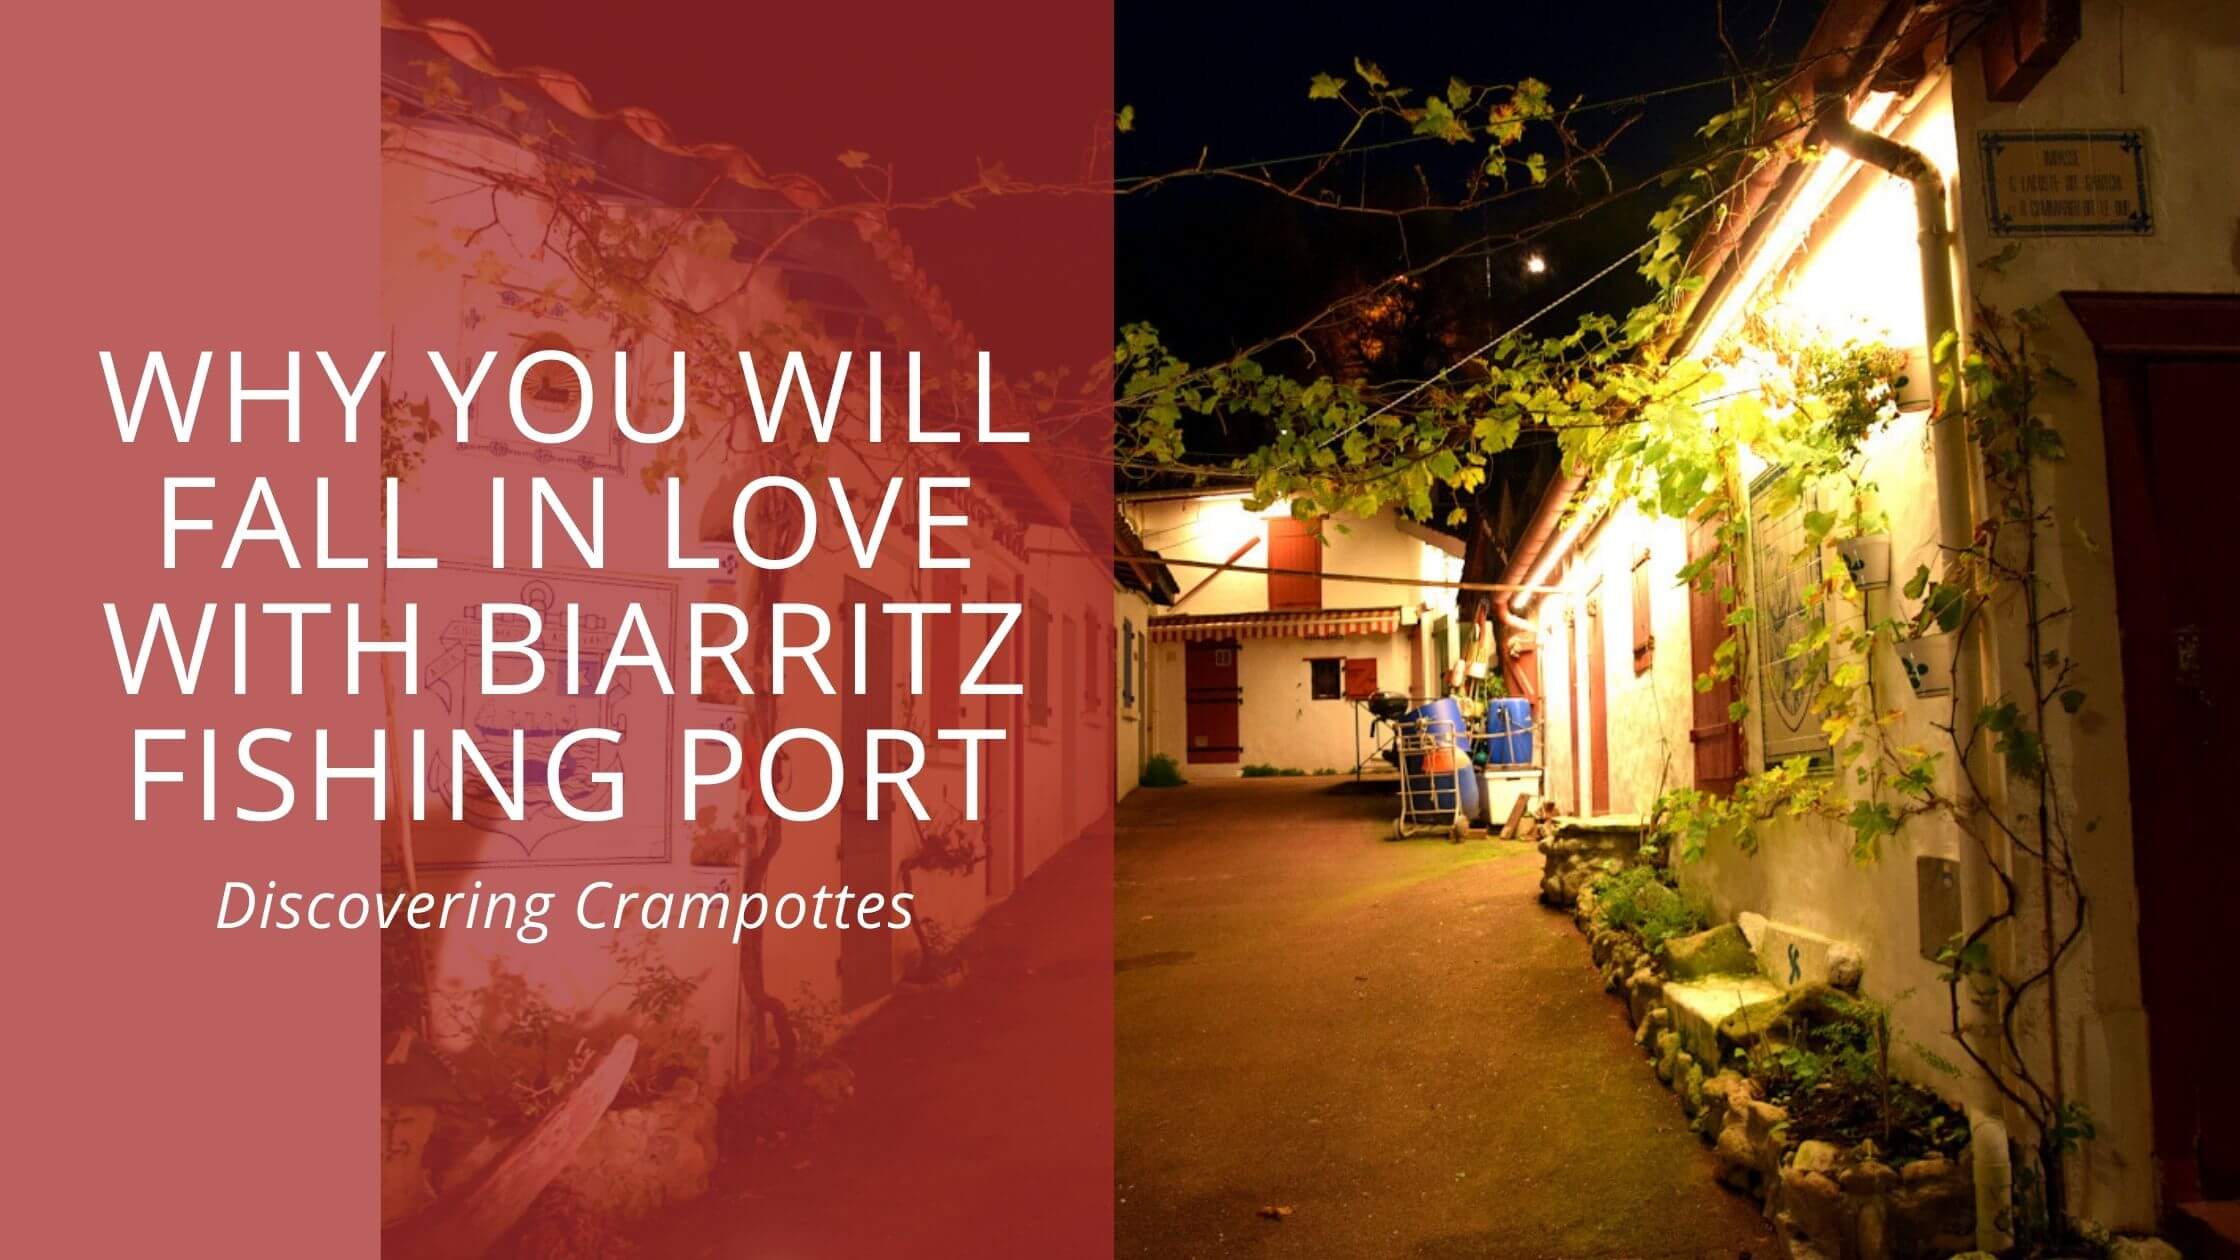 Why You Will Fall In Love With the Picturesque Biarritz Fishing Port